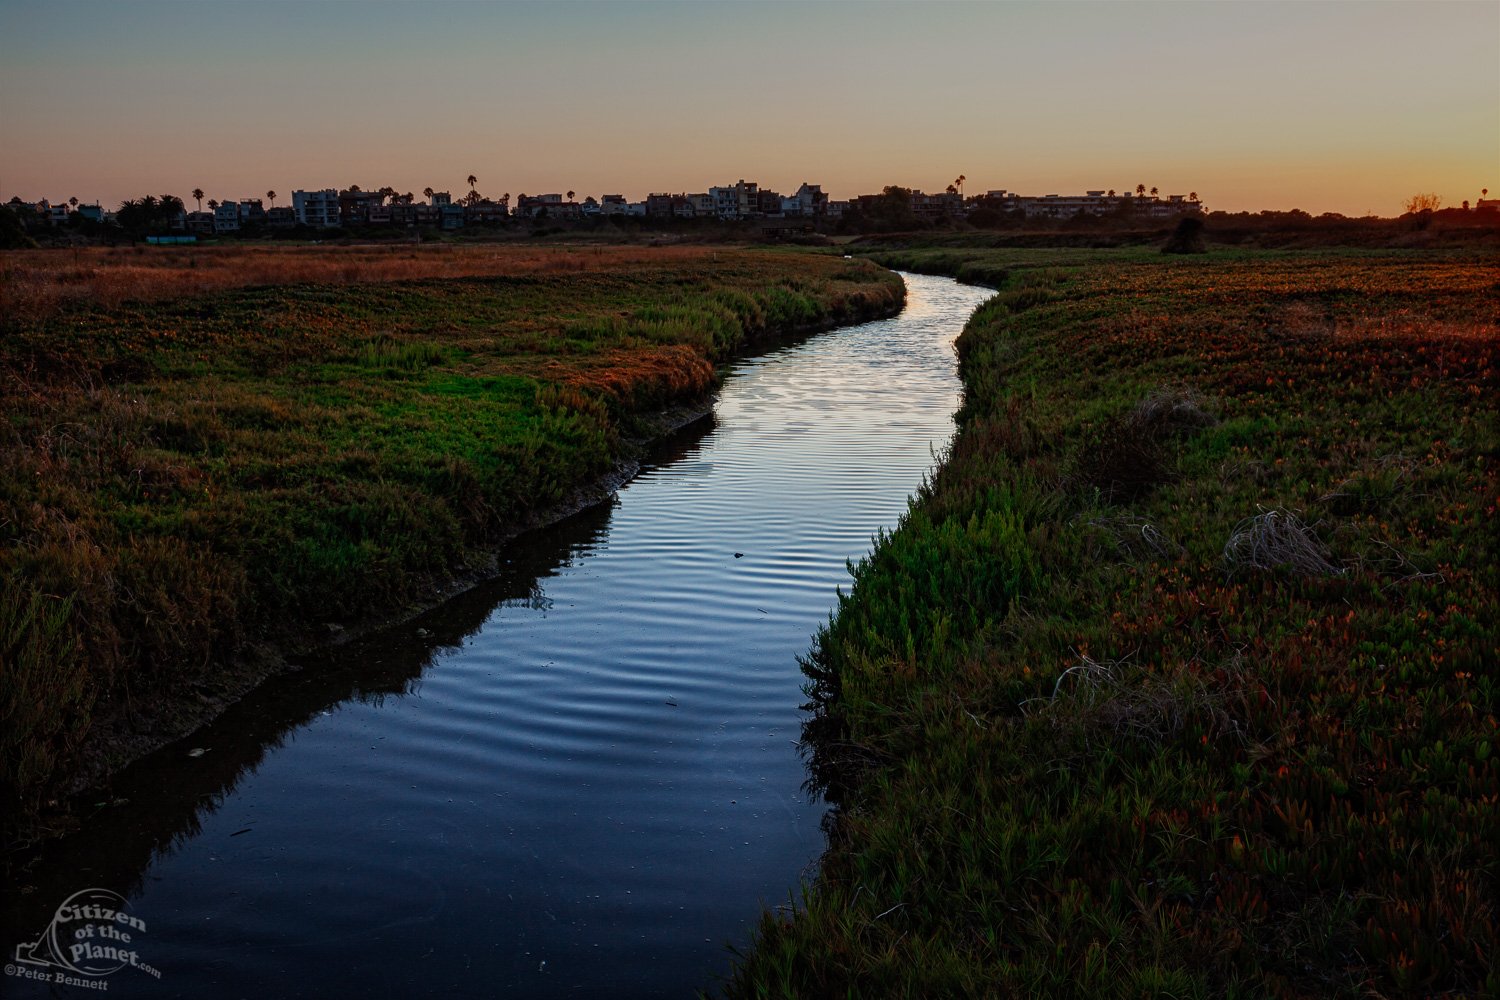  Sun sets over Ballona Wetlands with homes in Playa Del Rey in the background 